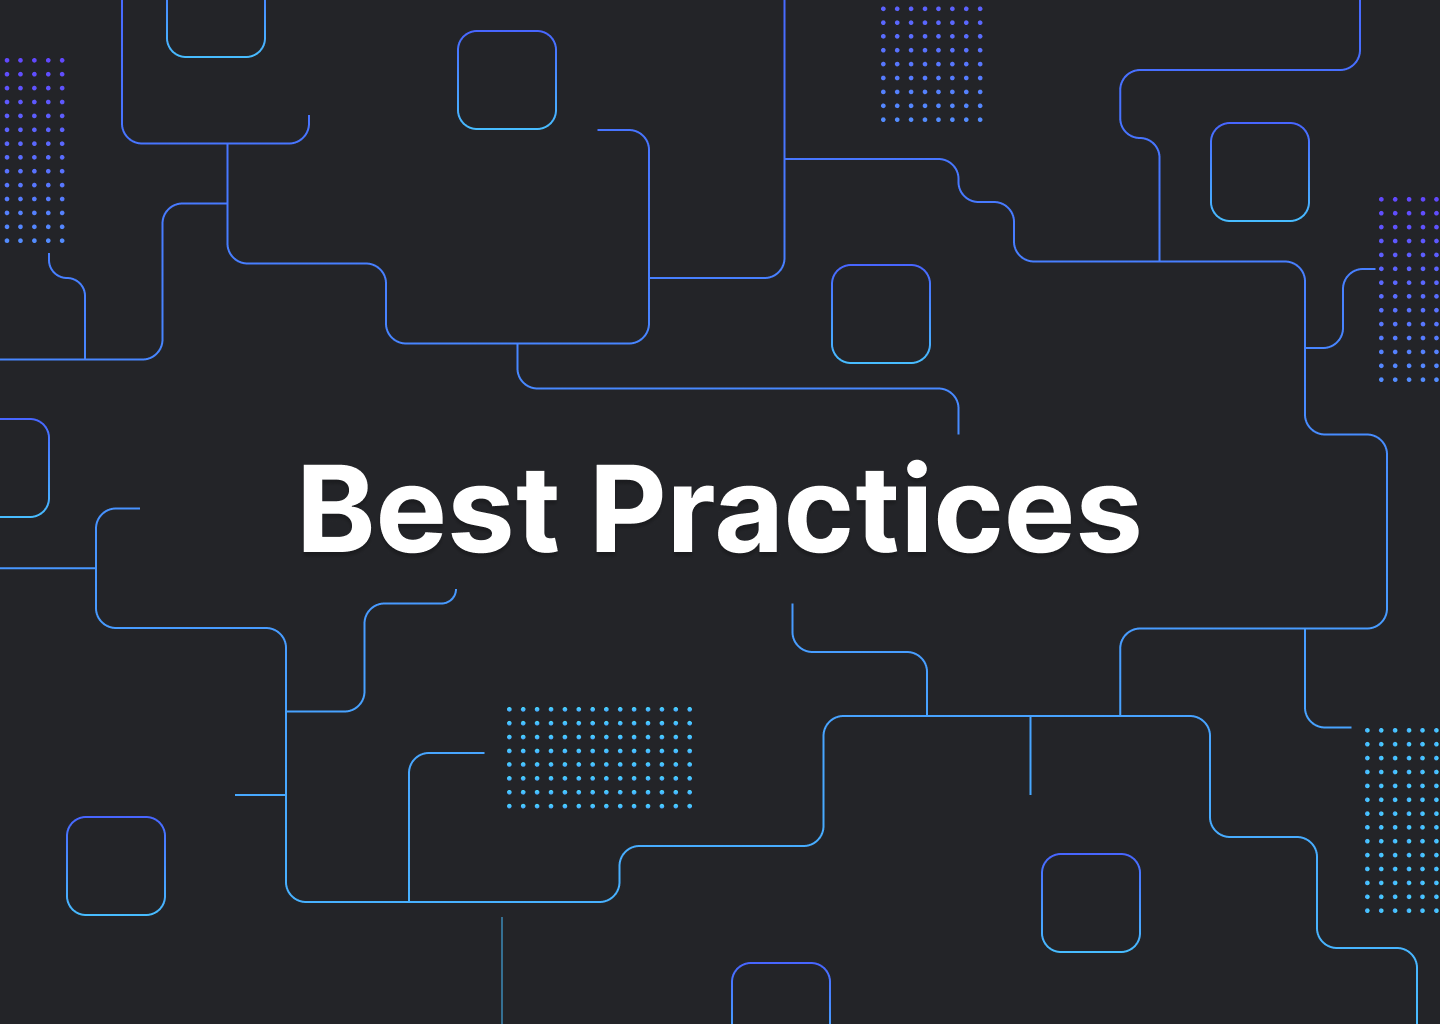 Linting best practices